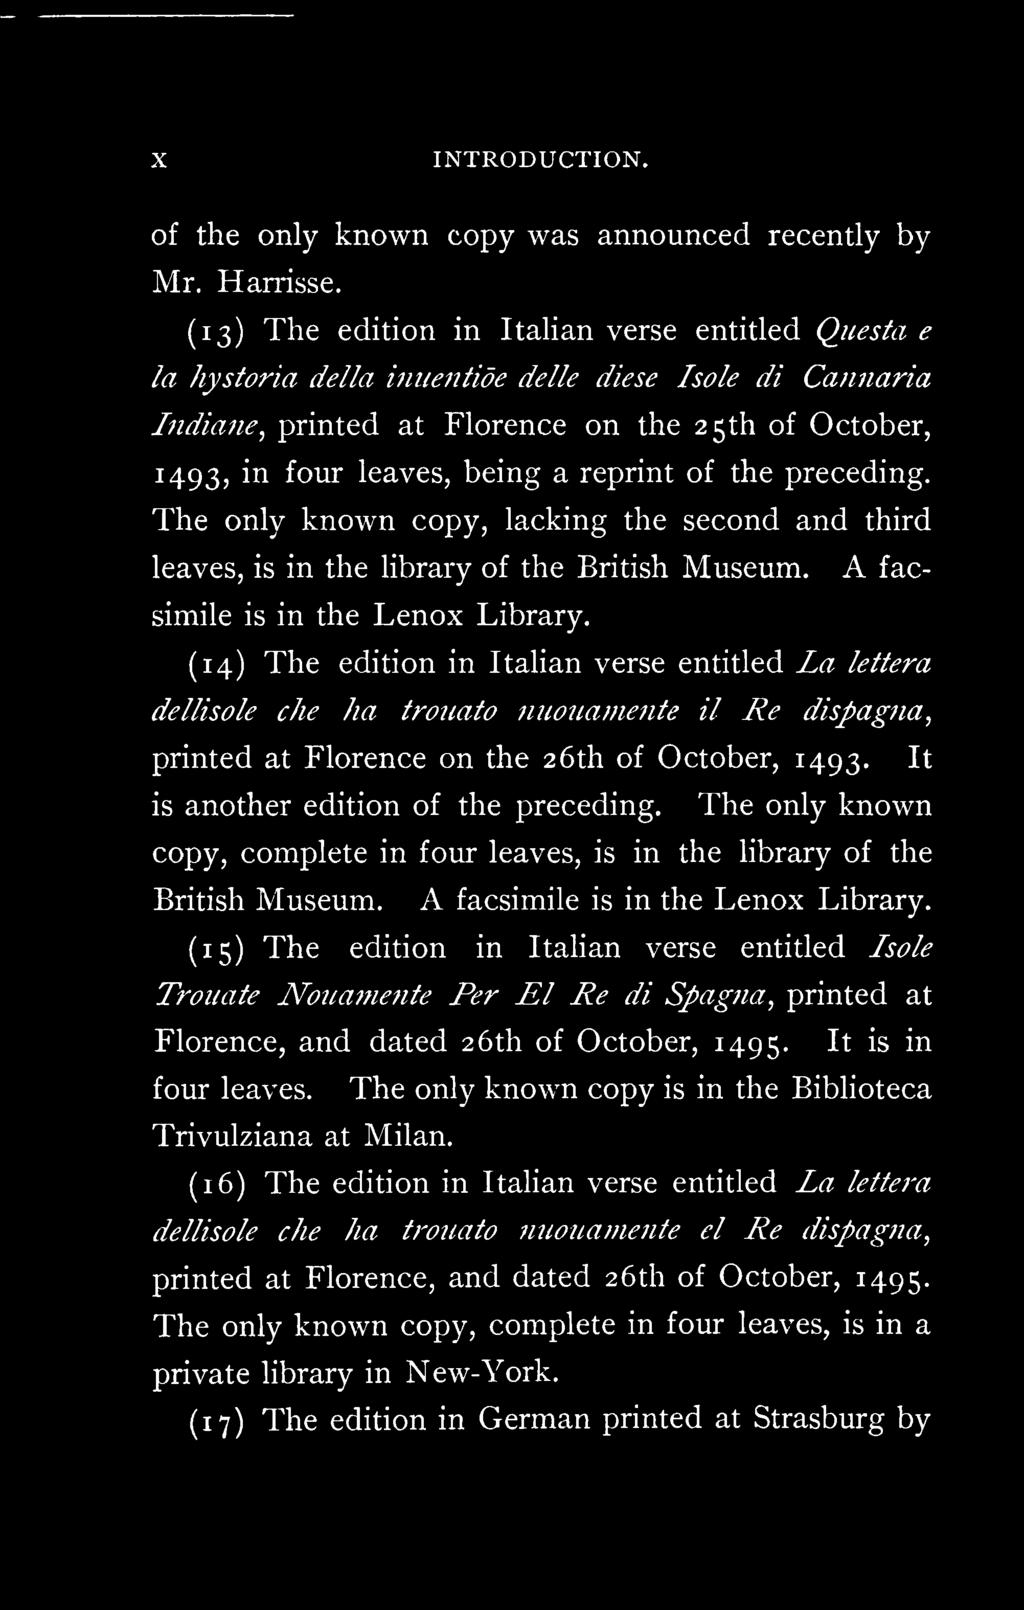 The only known copy, lacking the second and third leaves, is in the library of the British Museum. A facsimile is in the Lenox Library.